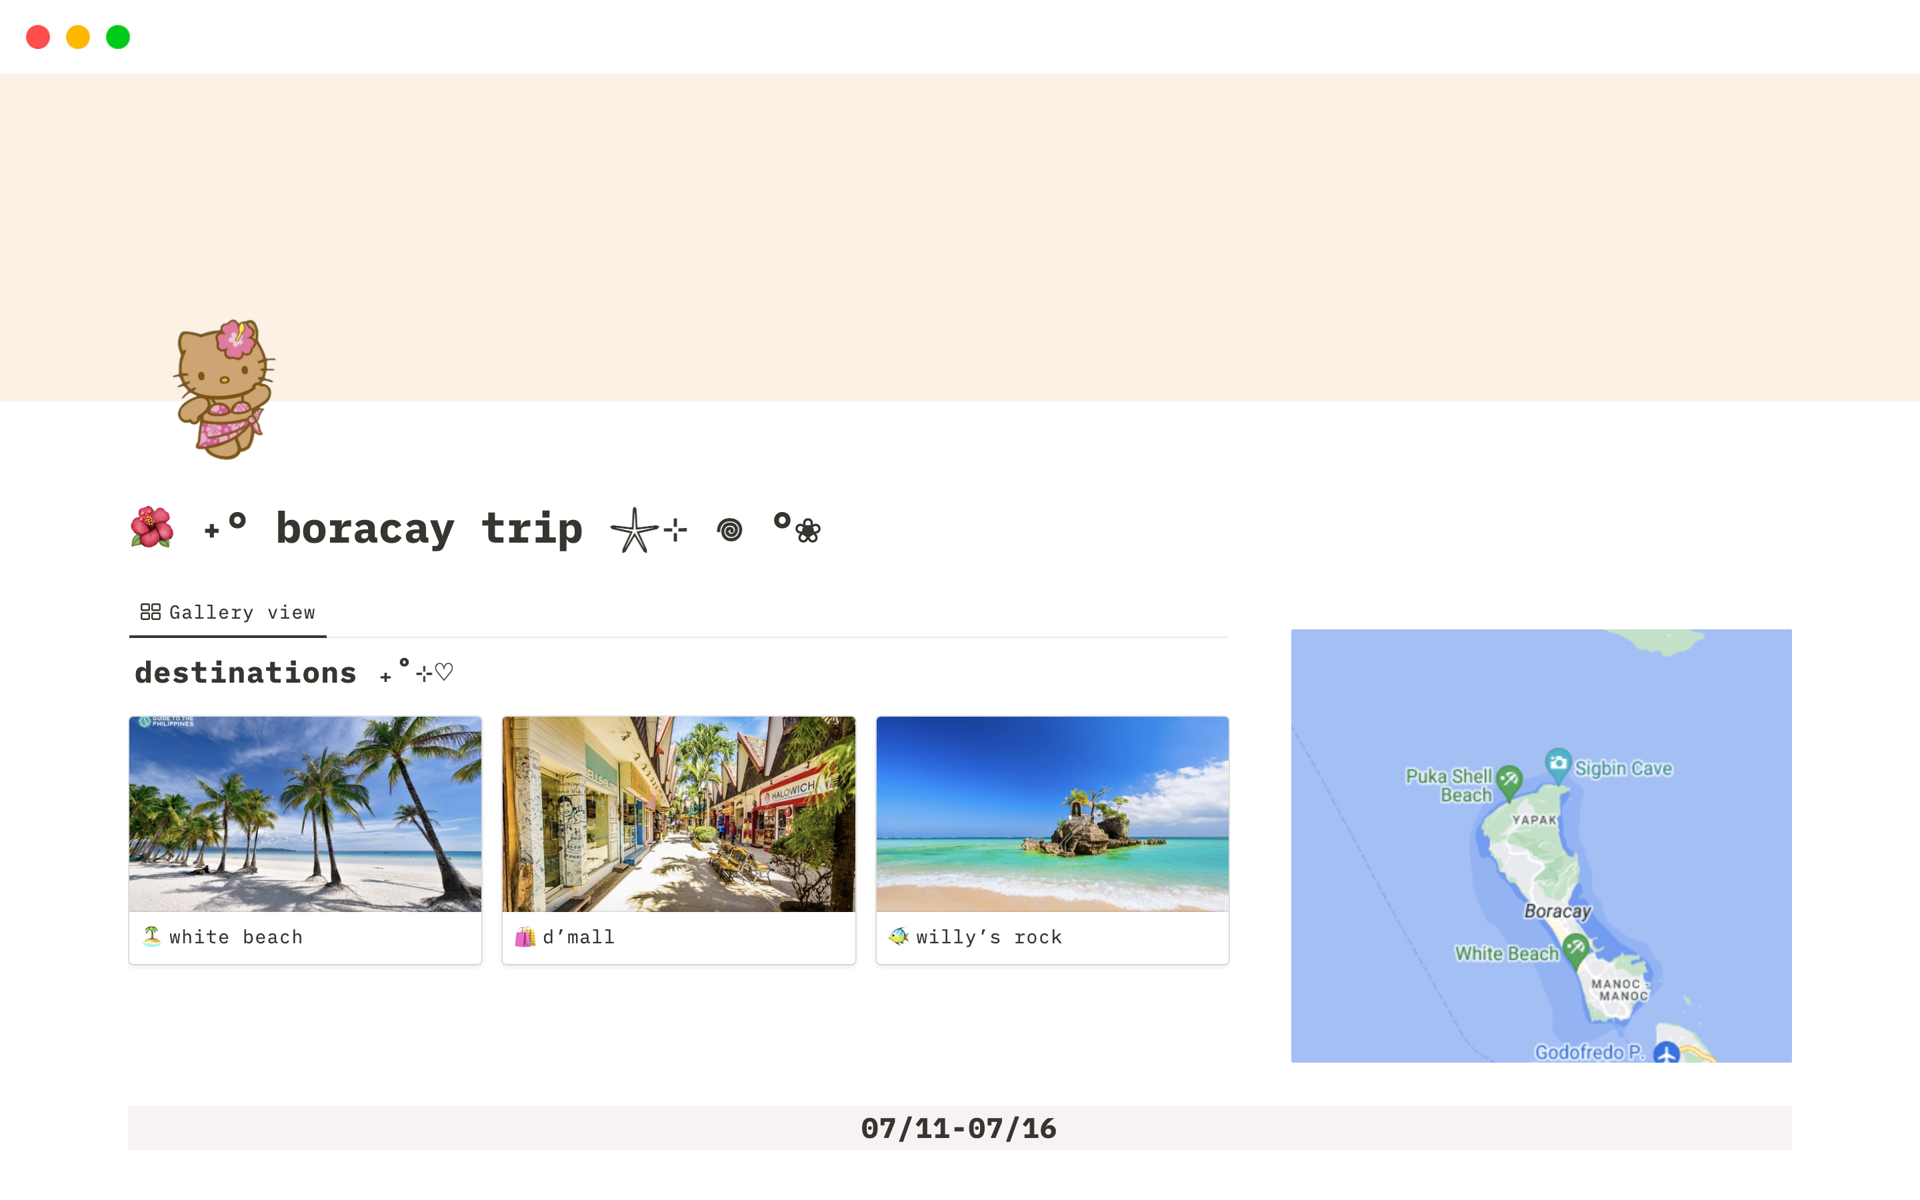 A template preview for Vacation Planner